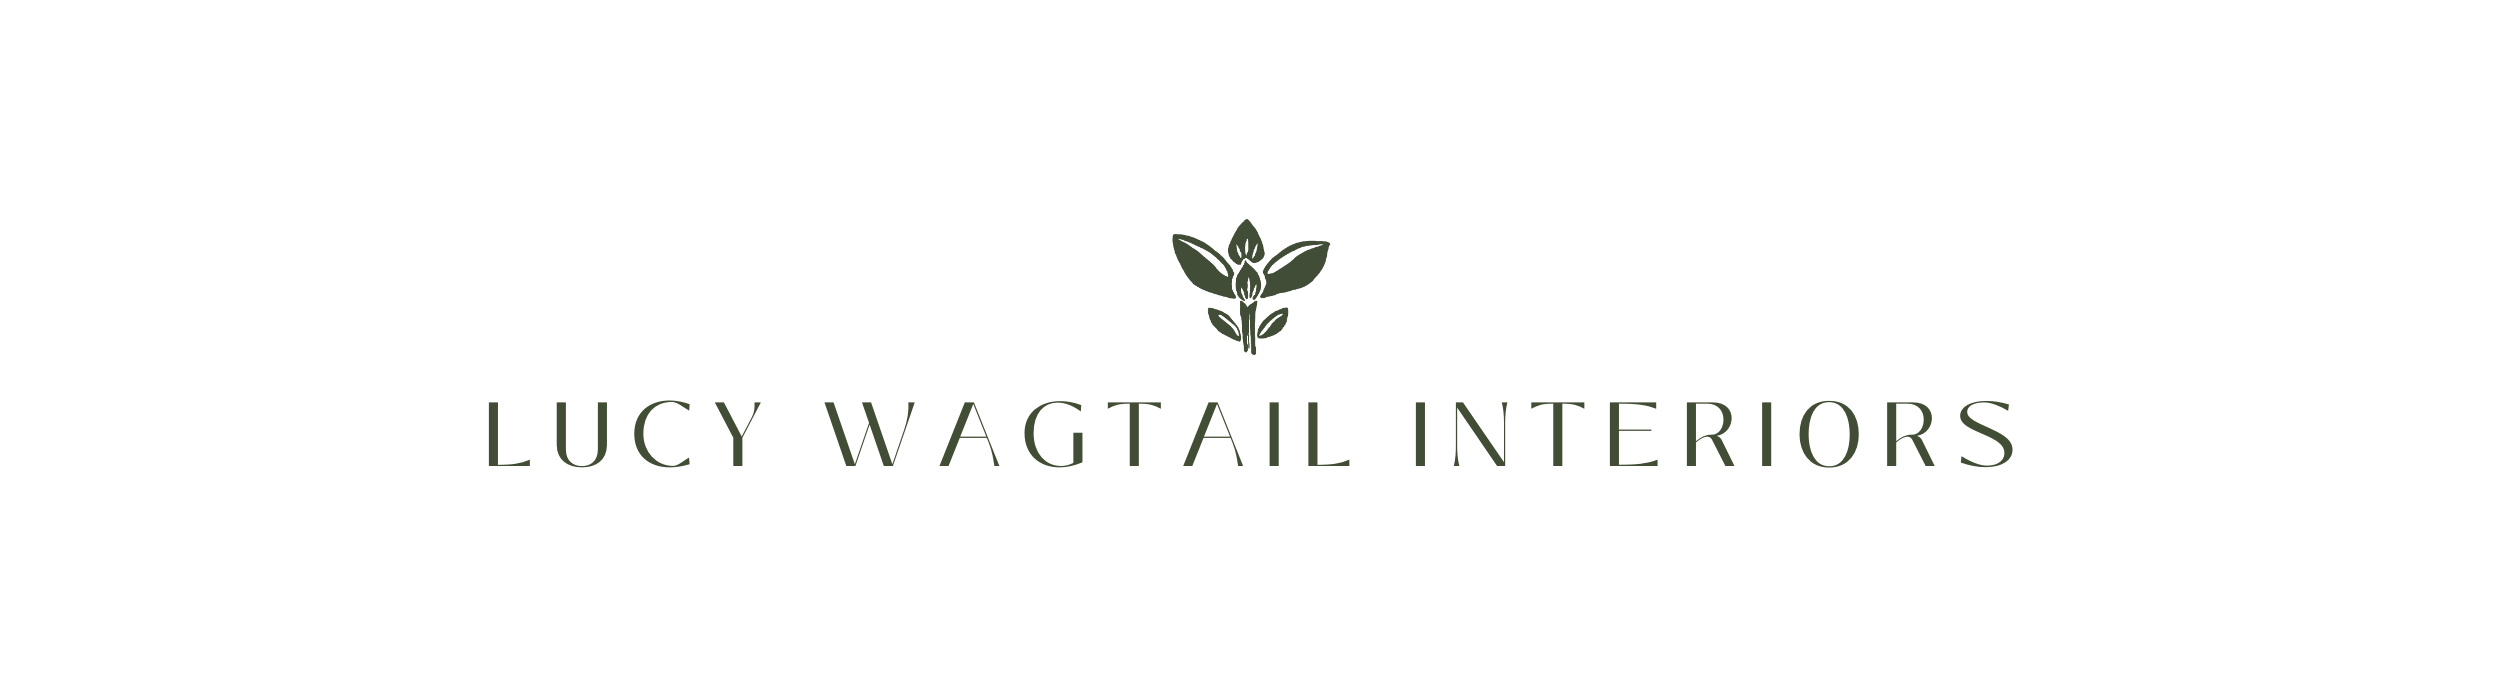 Lucy Wagtail Interiors Logo